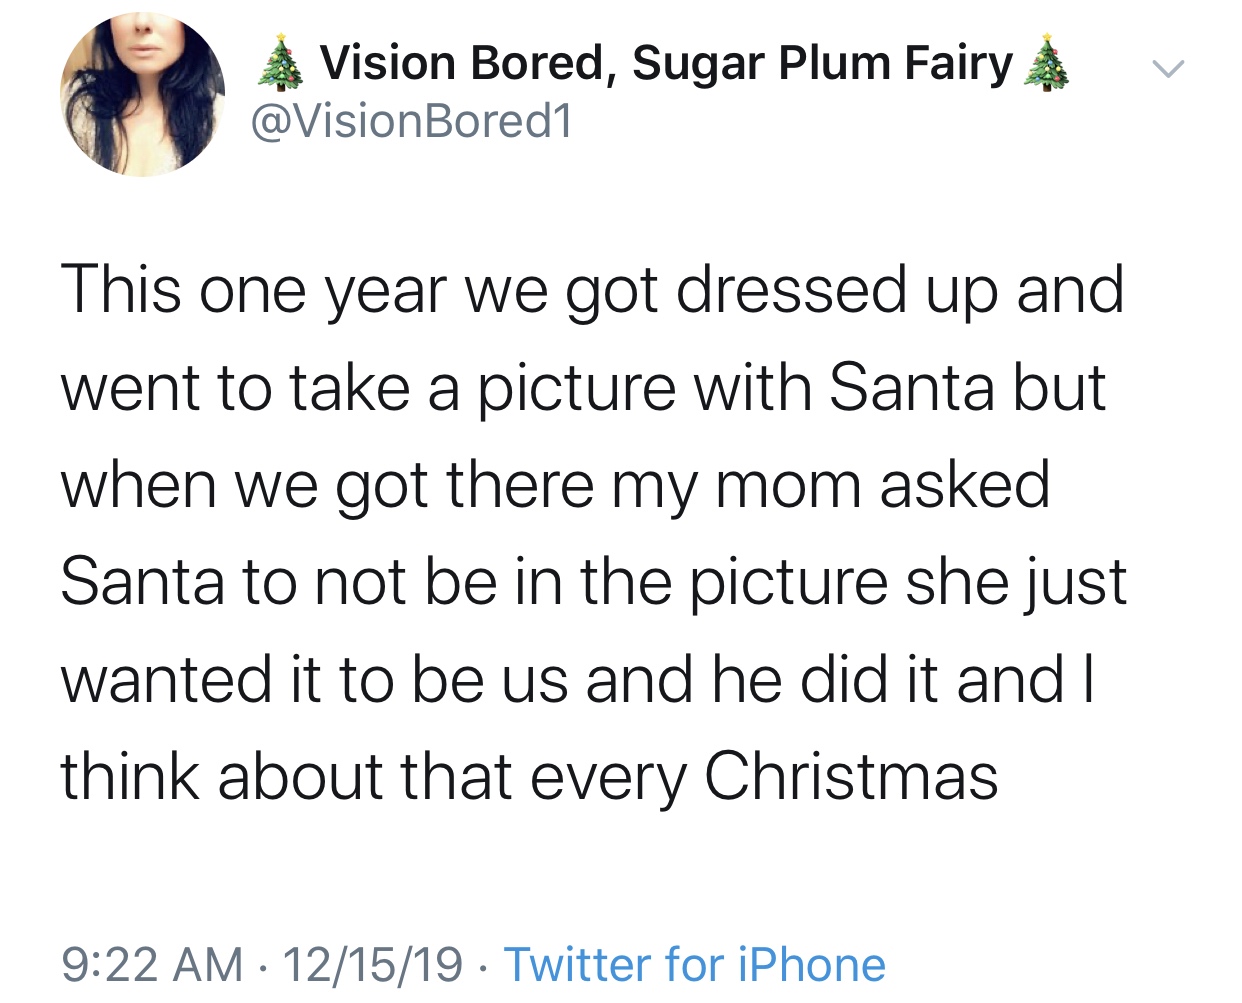 harry potter funny - Vision Bored, Sugar Plum Fairy v This one year we got dressed up and went to take a picture with Santa but when we got there my mom asked Santa to not be in the picture she just wanted it to be us and he did it and I think about that 